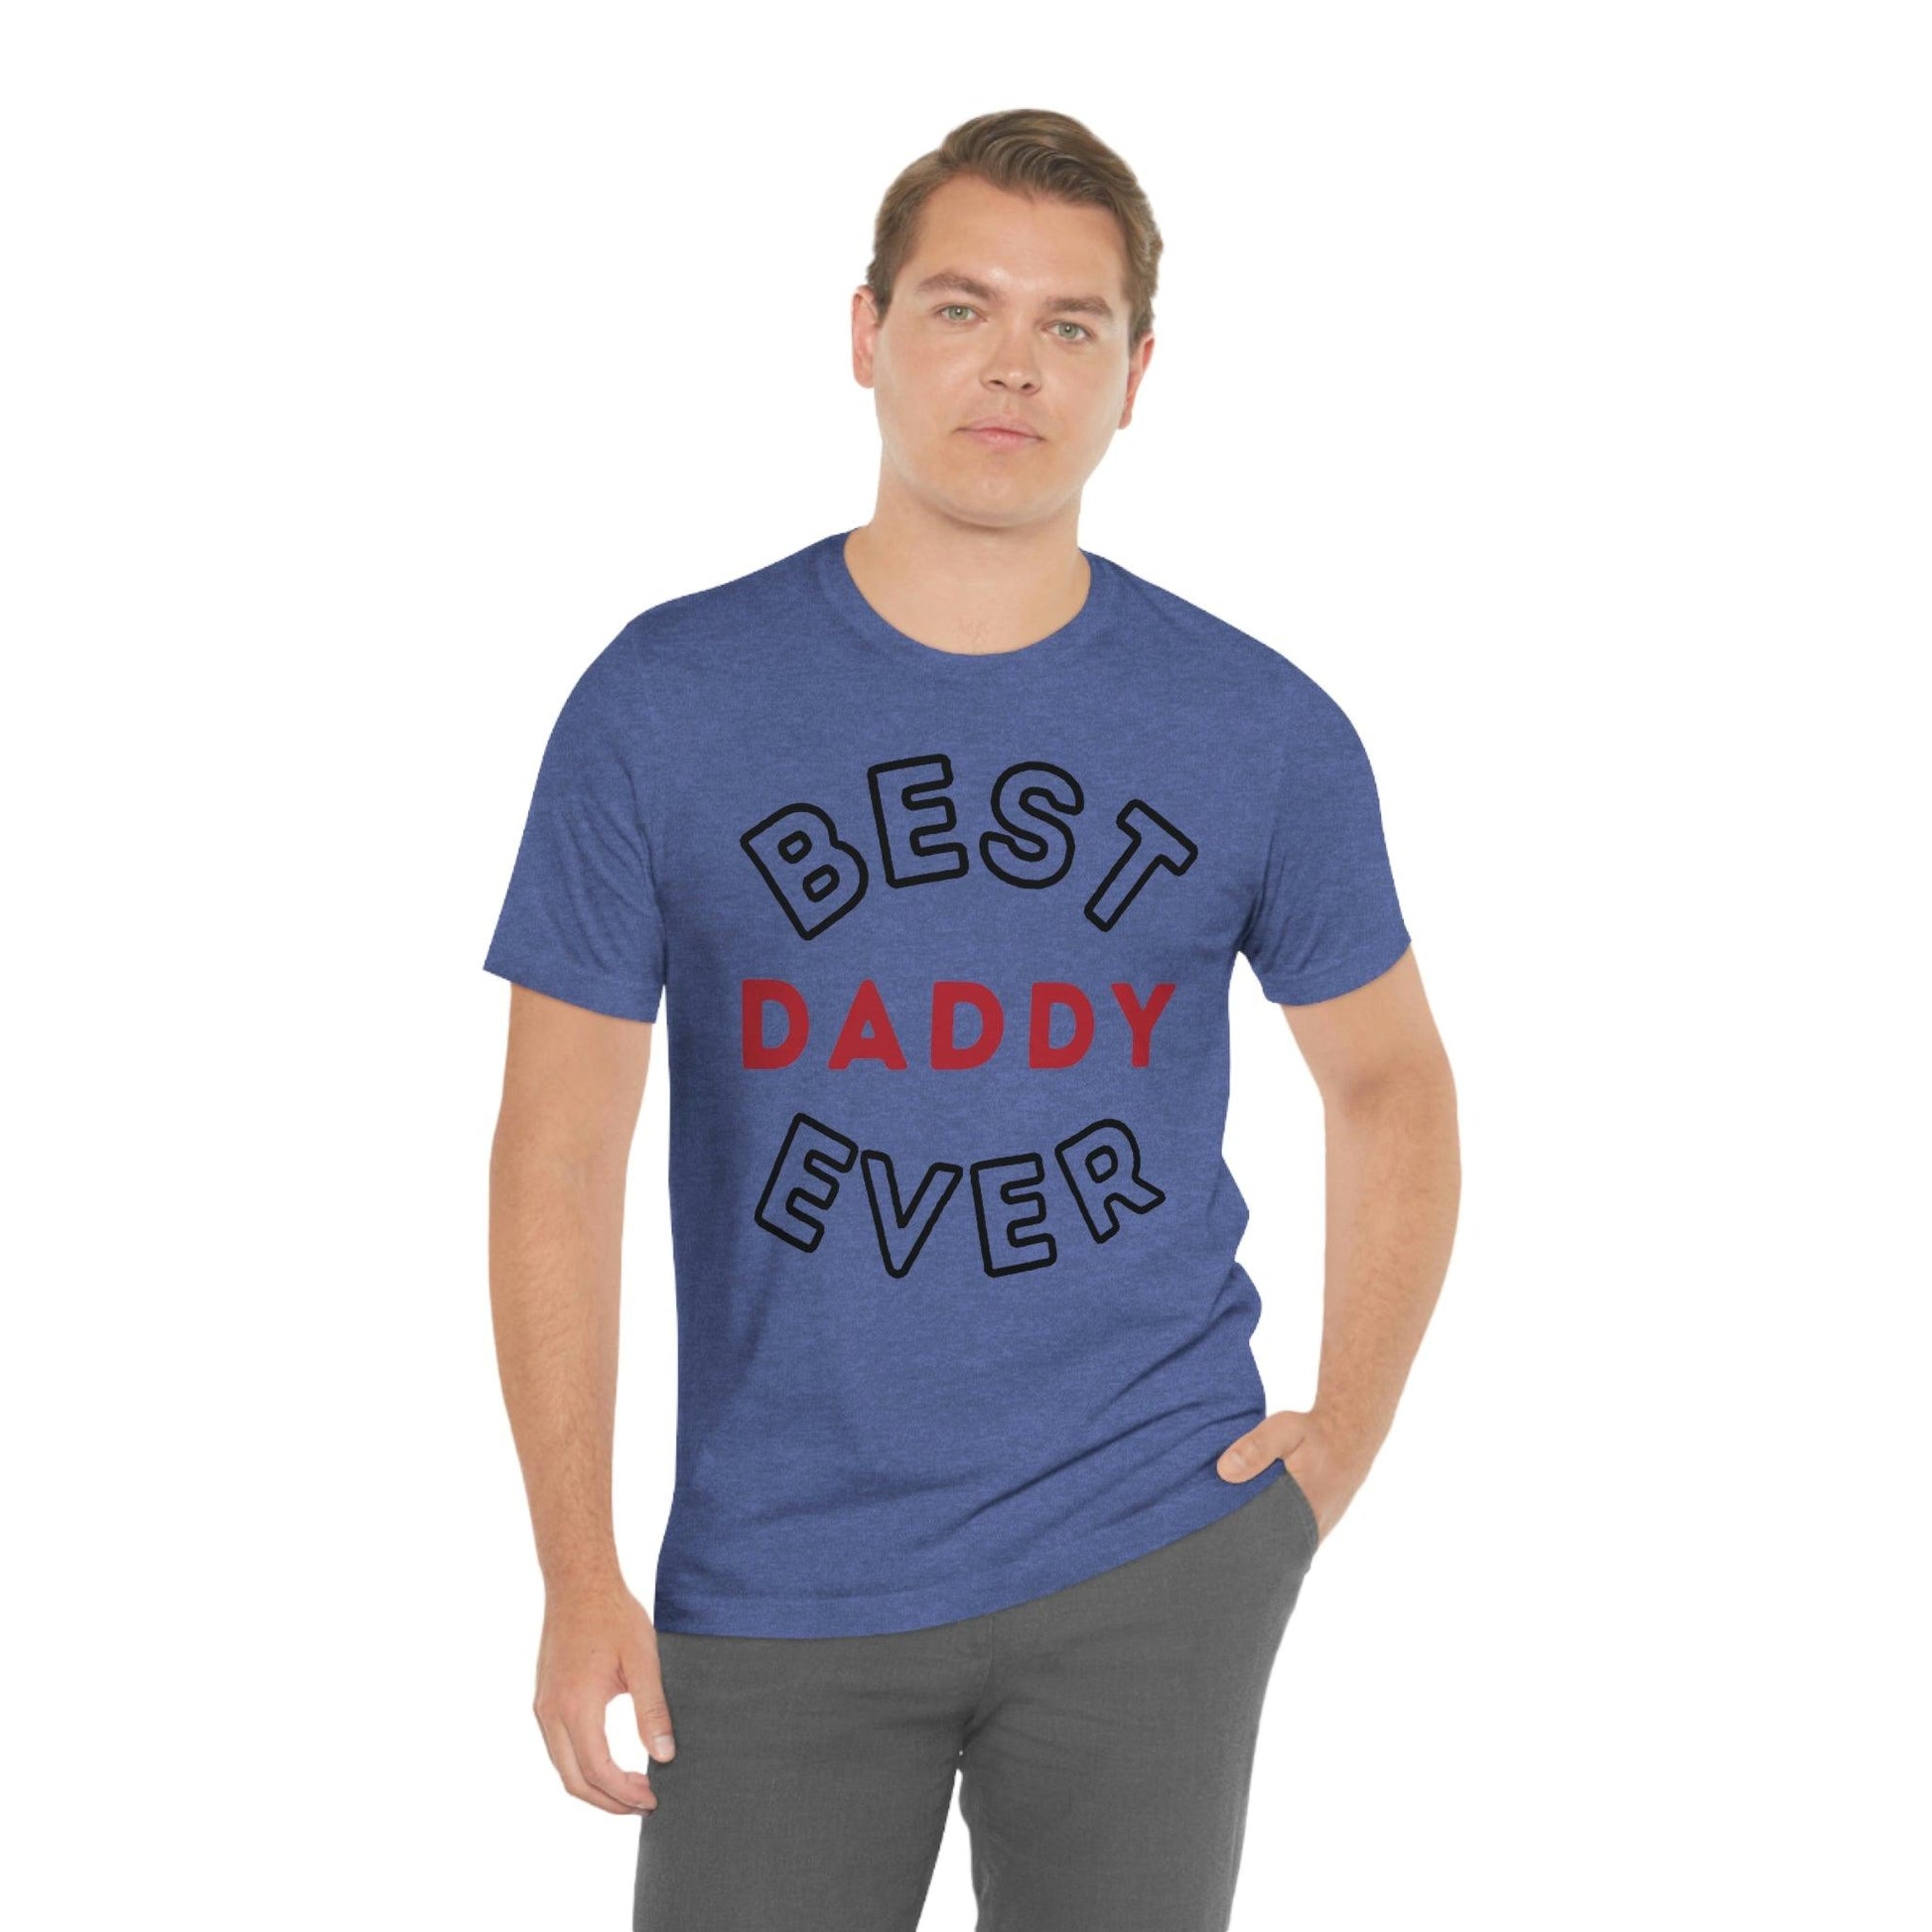 Dad Gift - Best Dad Gift - Best Daddy Ever Shirt -Dad Shirt - Funny Fathers Gift - Husband Gift - Funny Dad Tshirt - Dad Birthday Gift - Giftsmojo